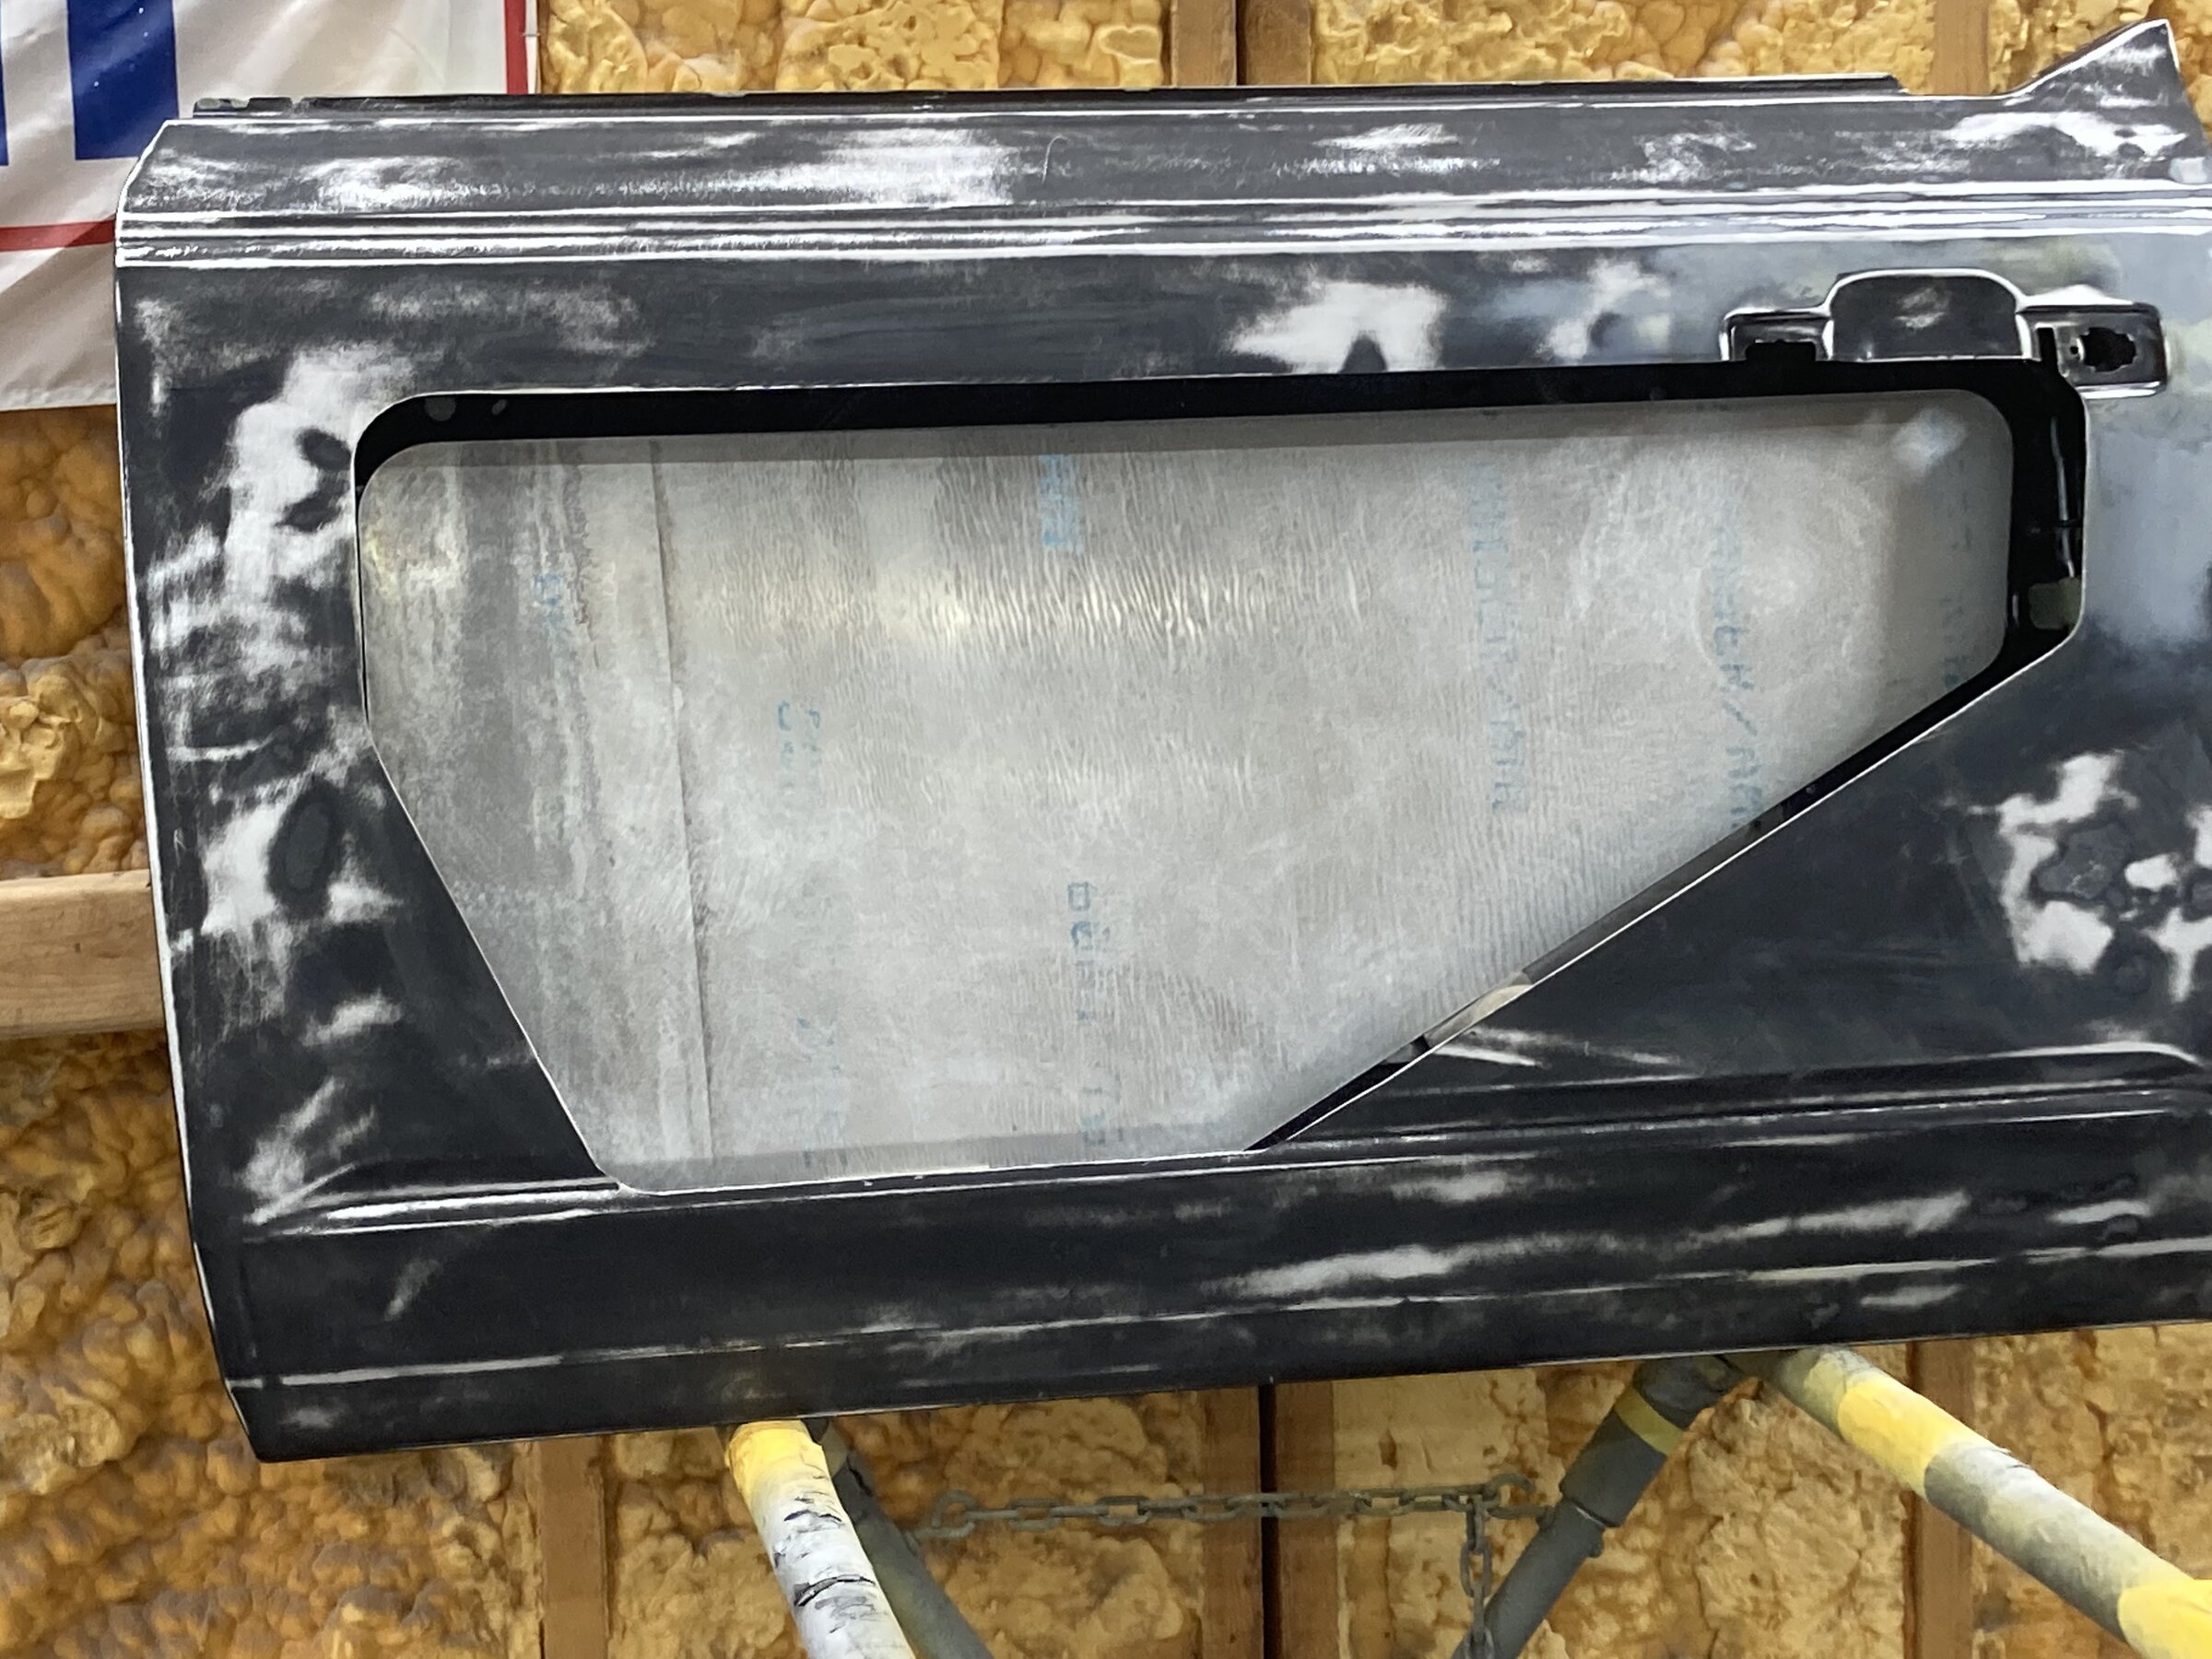 Ford Bronco Donut Doors are coming! 5C94B24C-8164-4C9A-A25F-F1B893452132